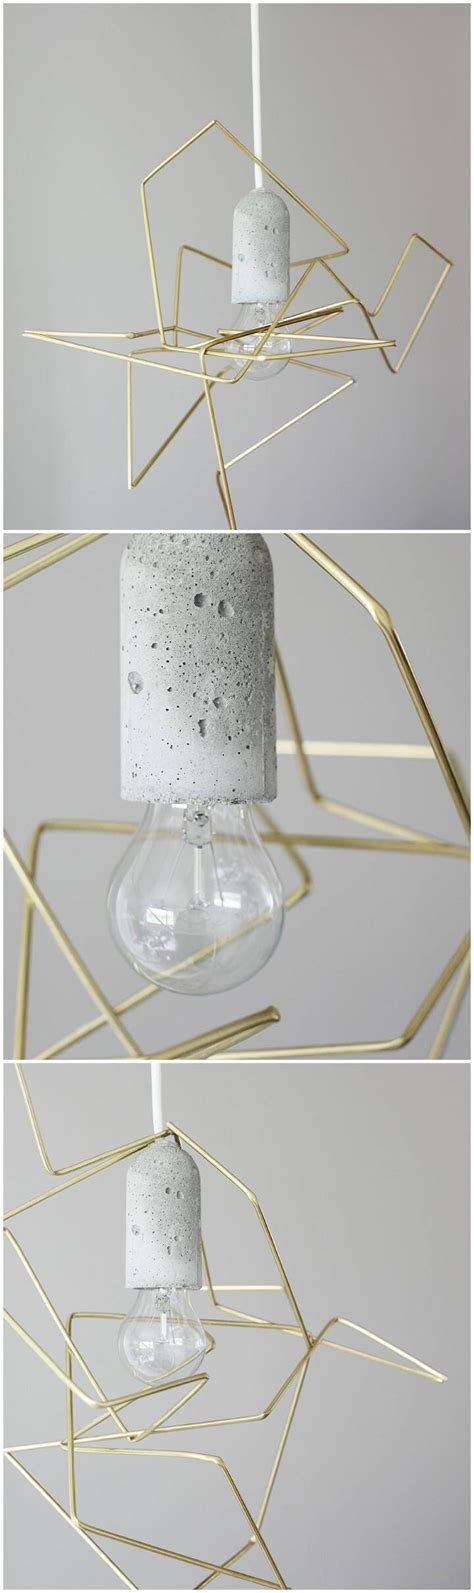 100 Diy Pendant Light Projects To Make Your Home Decoration Easy